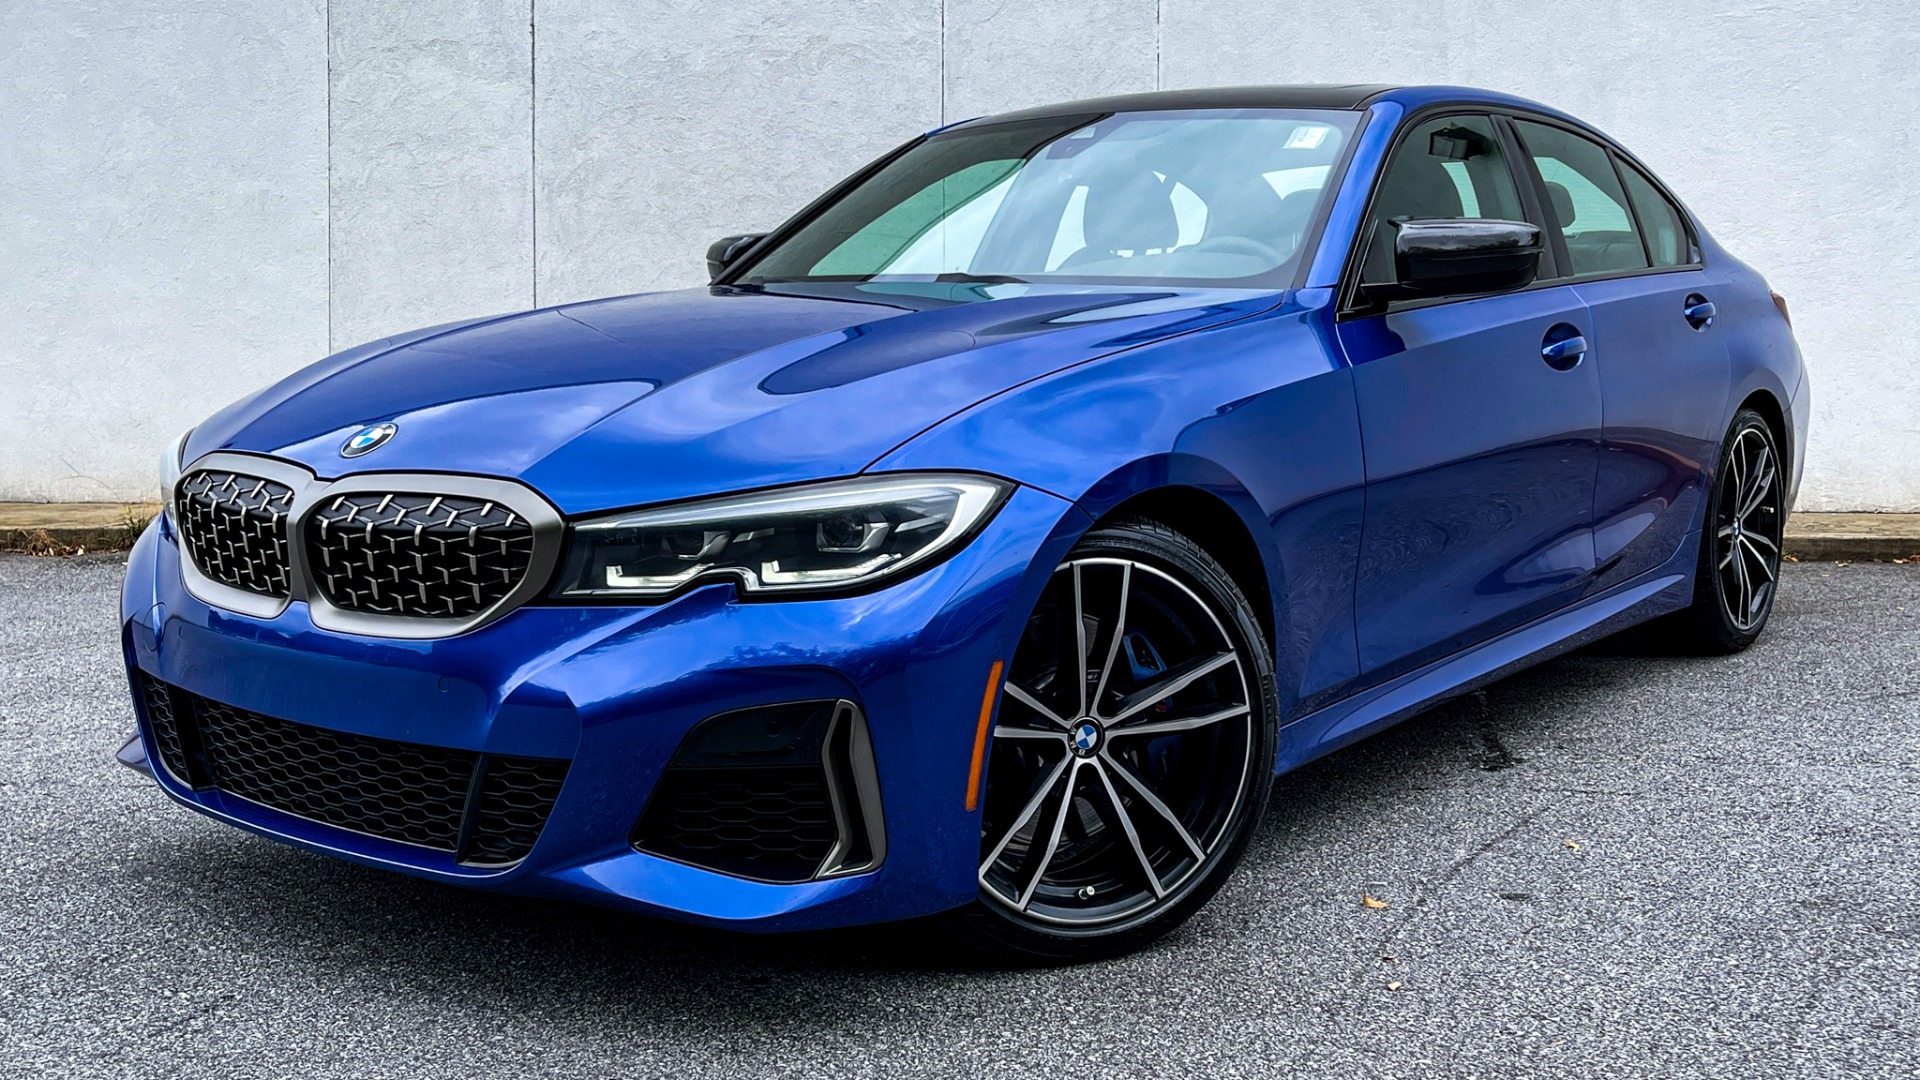 Used 2021 BMW 3 Series M340i / REMOTE START / DRIVING ASSISTANCE / 19IN WHEELS / INTAKE SYSTEM for sale $52,995 at Formula Imports in Charlotte NC 28227 1